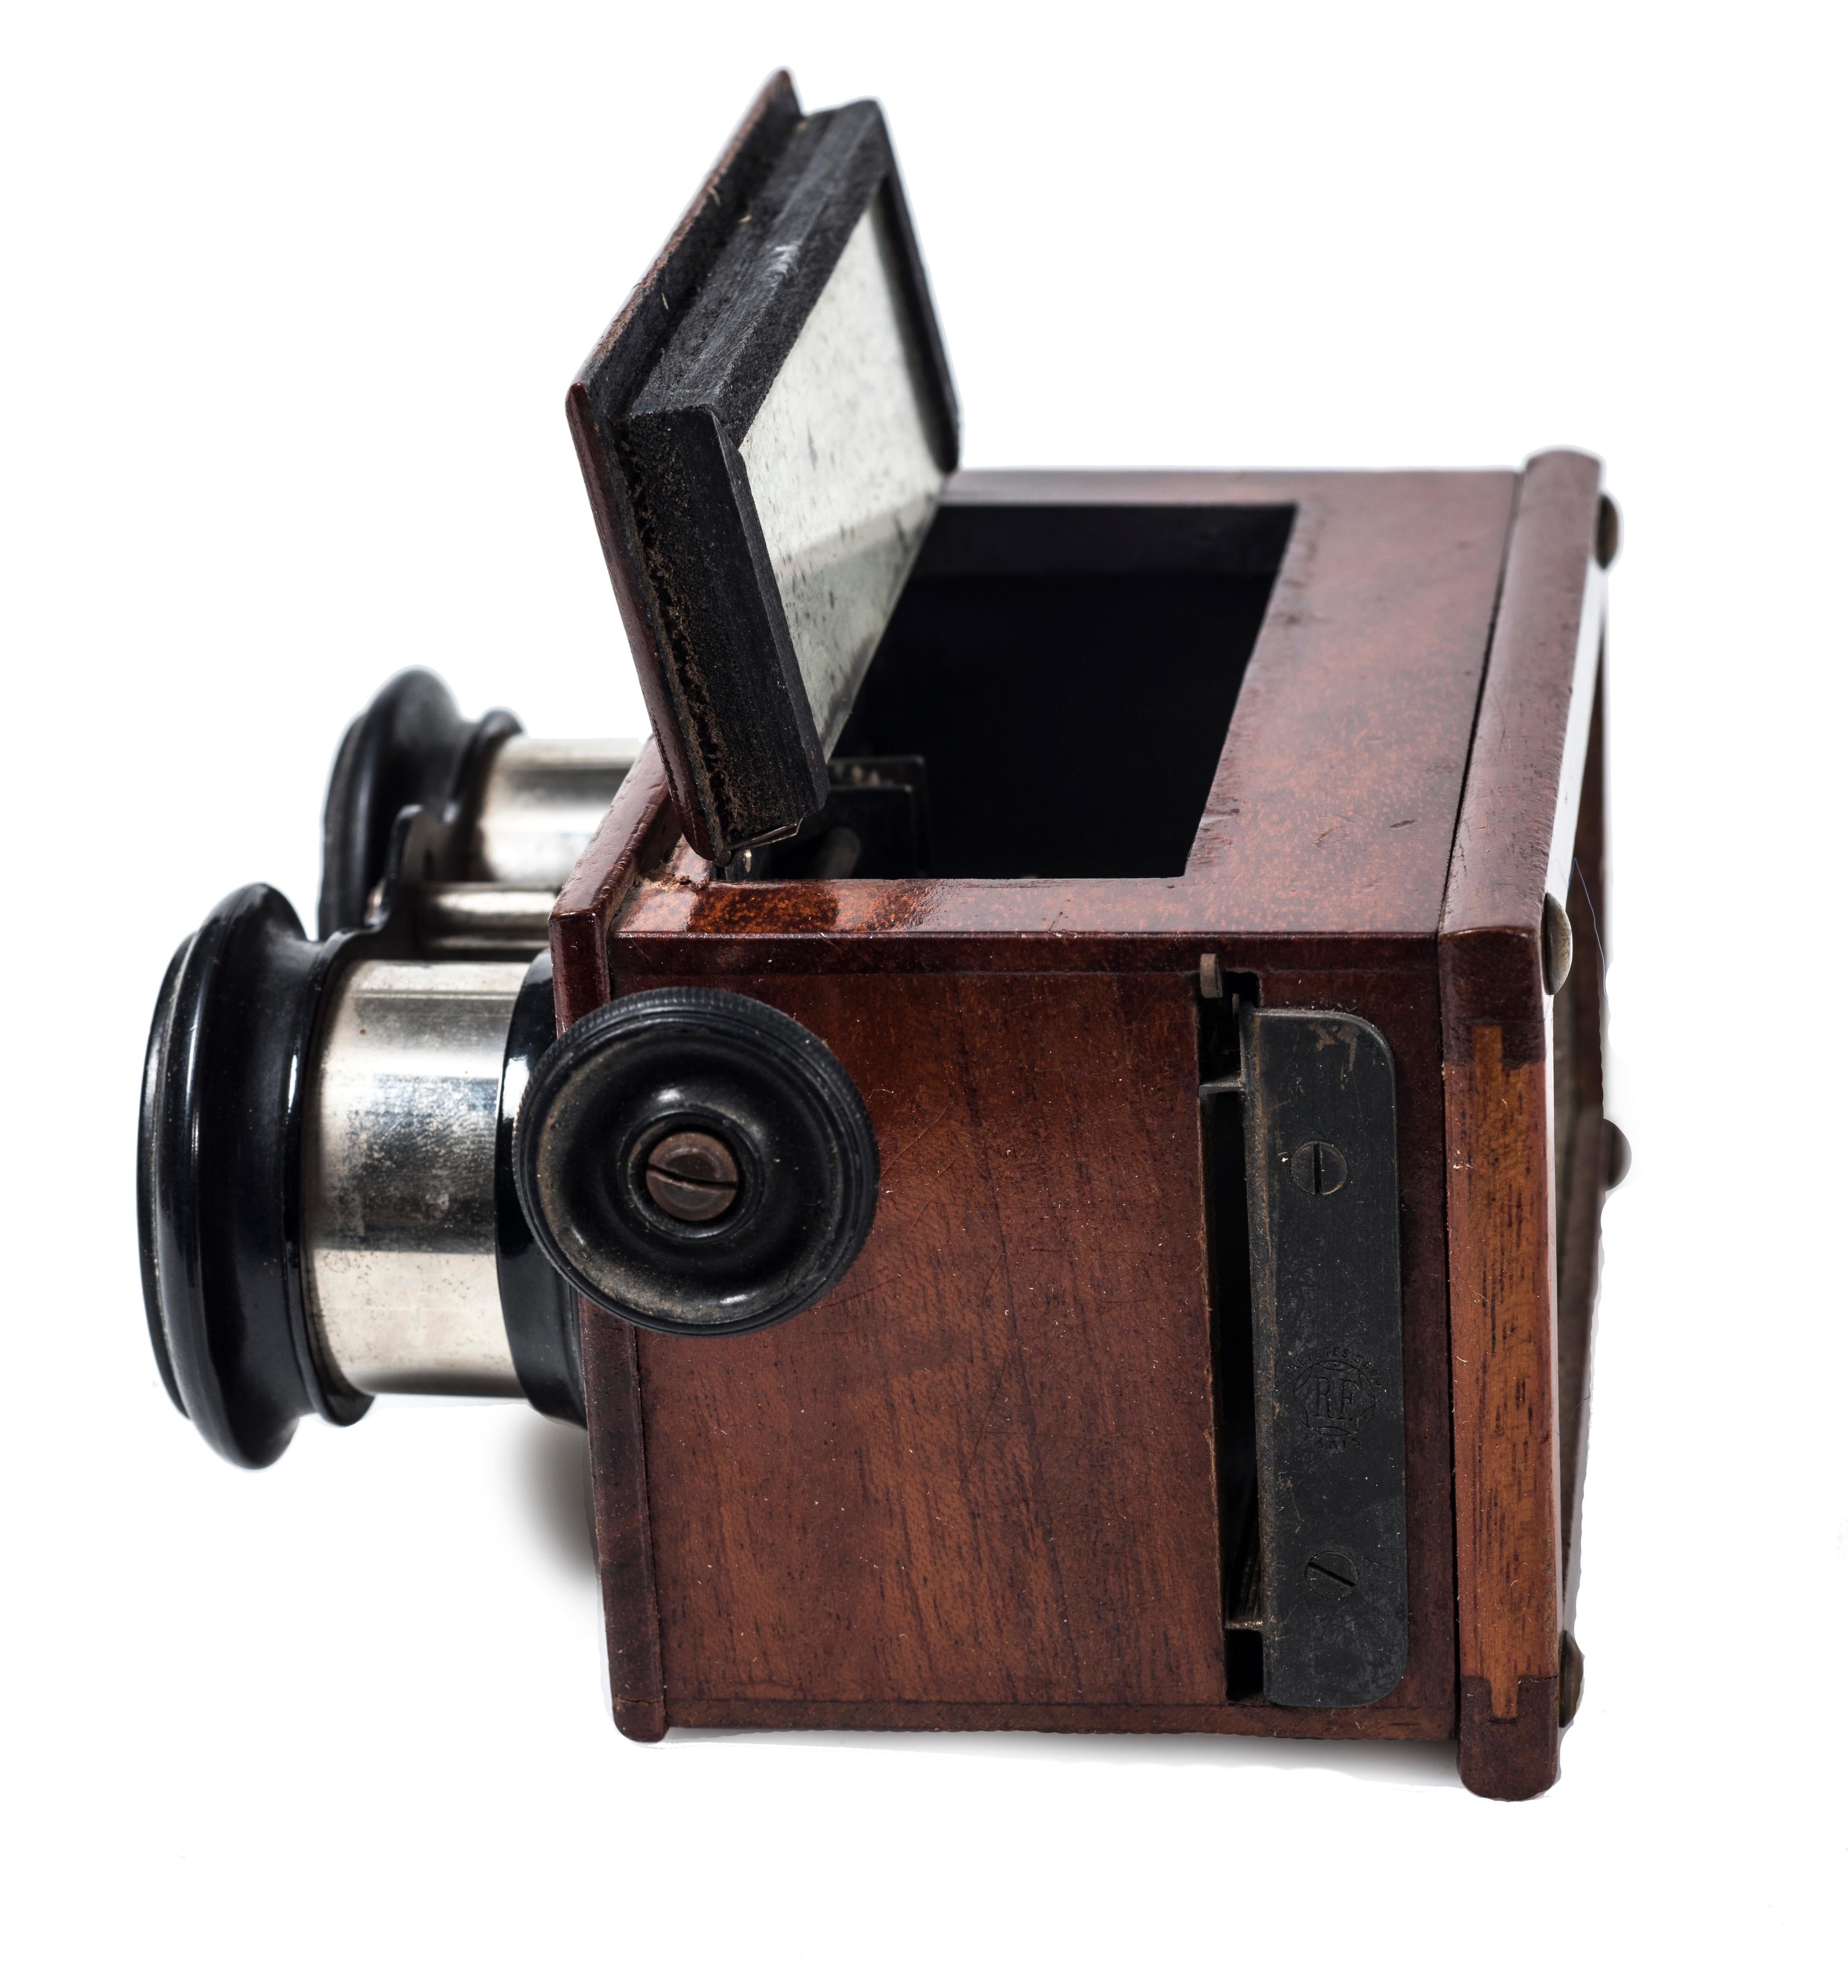 Vintage Stereoscope is an original decorative wood object realized in France by Vérascope factory during the 19th century.

Includes a metal label of the manufacturer brand. 

This very rare stereoscope was realized in mahogany wood. The